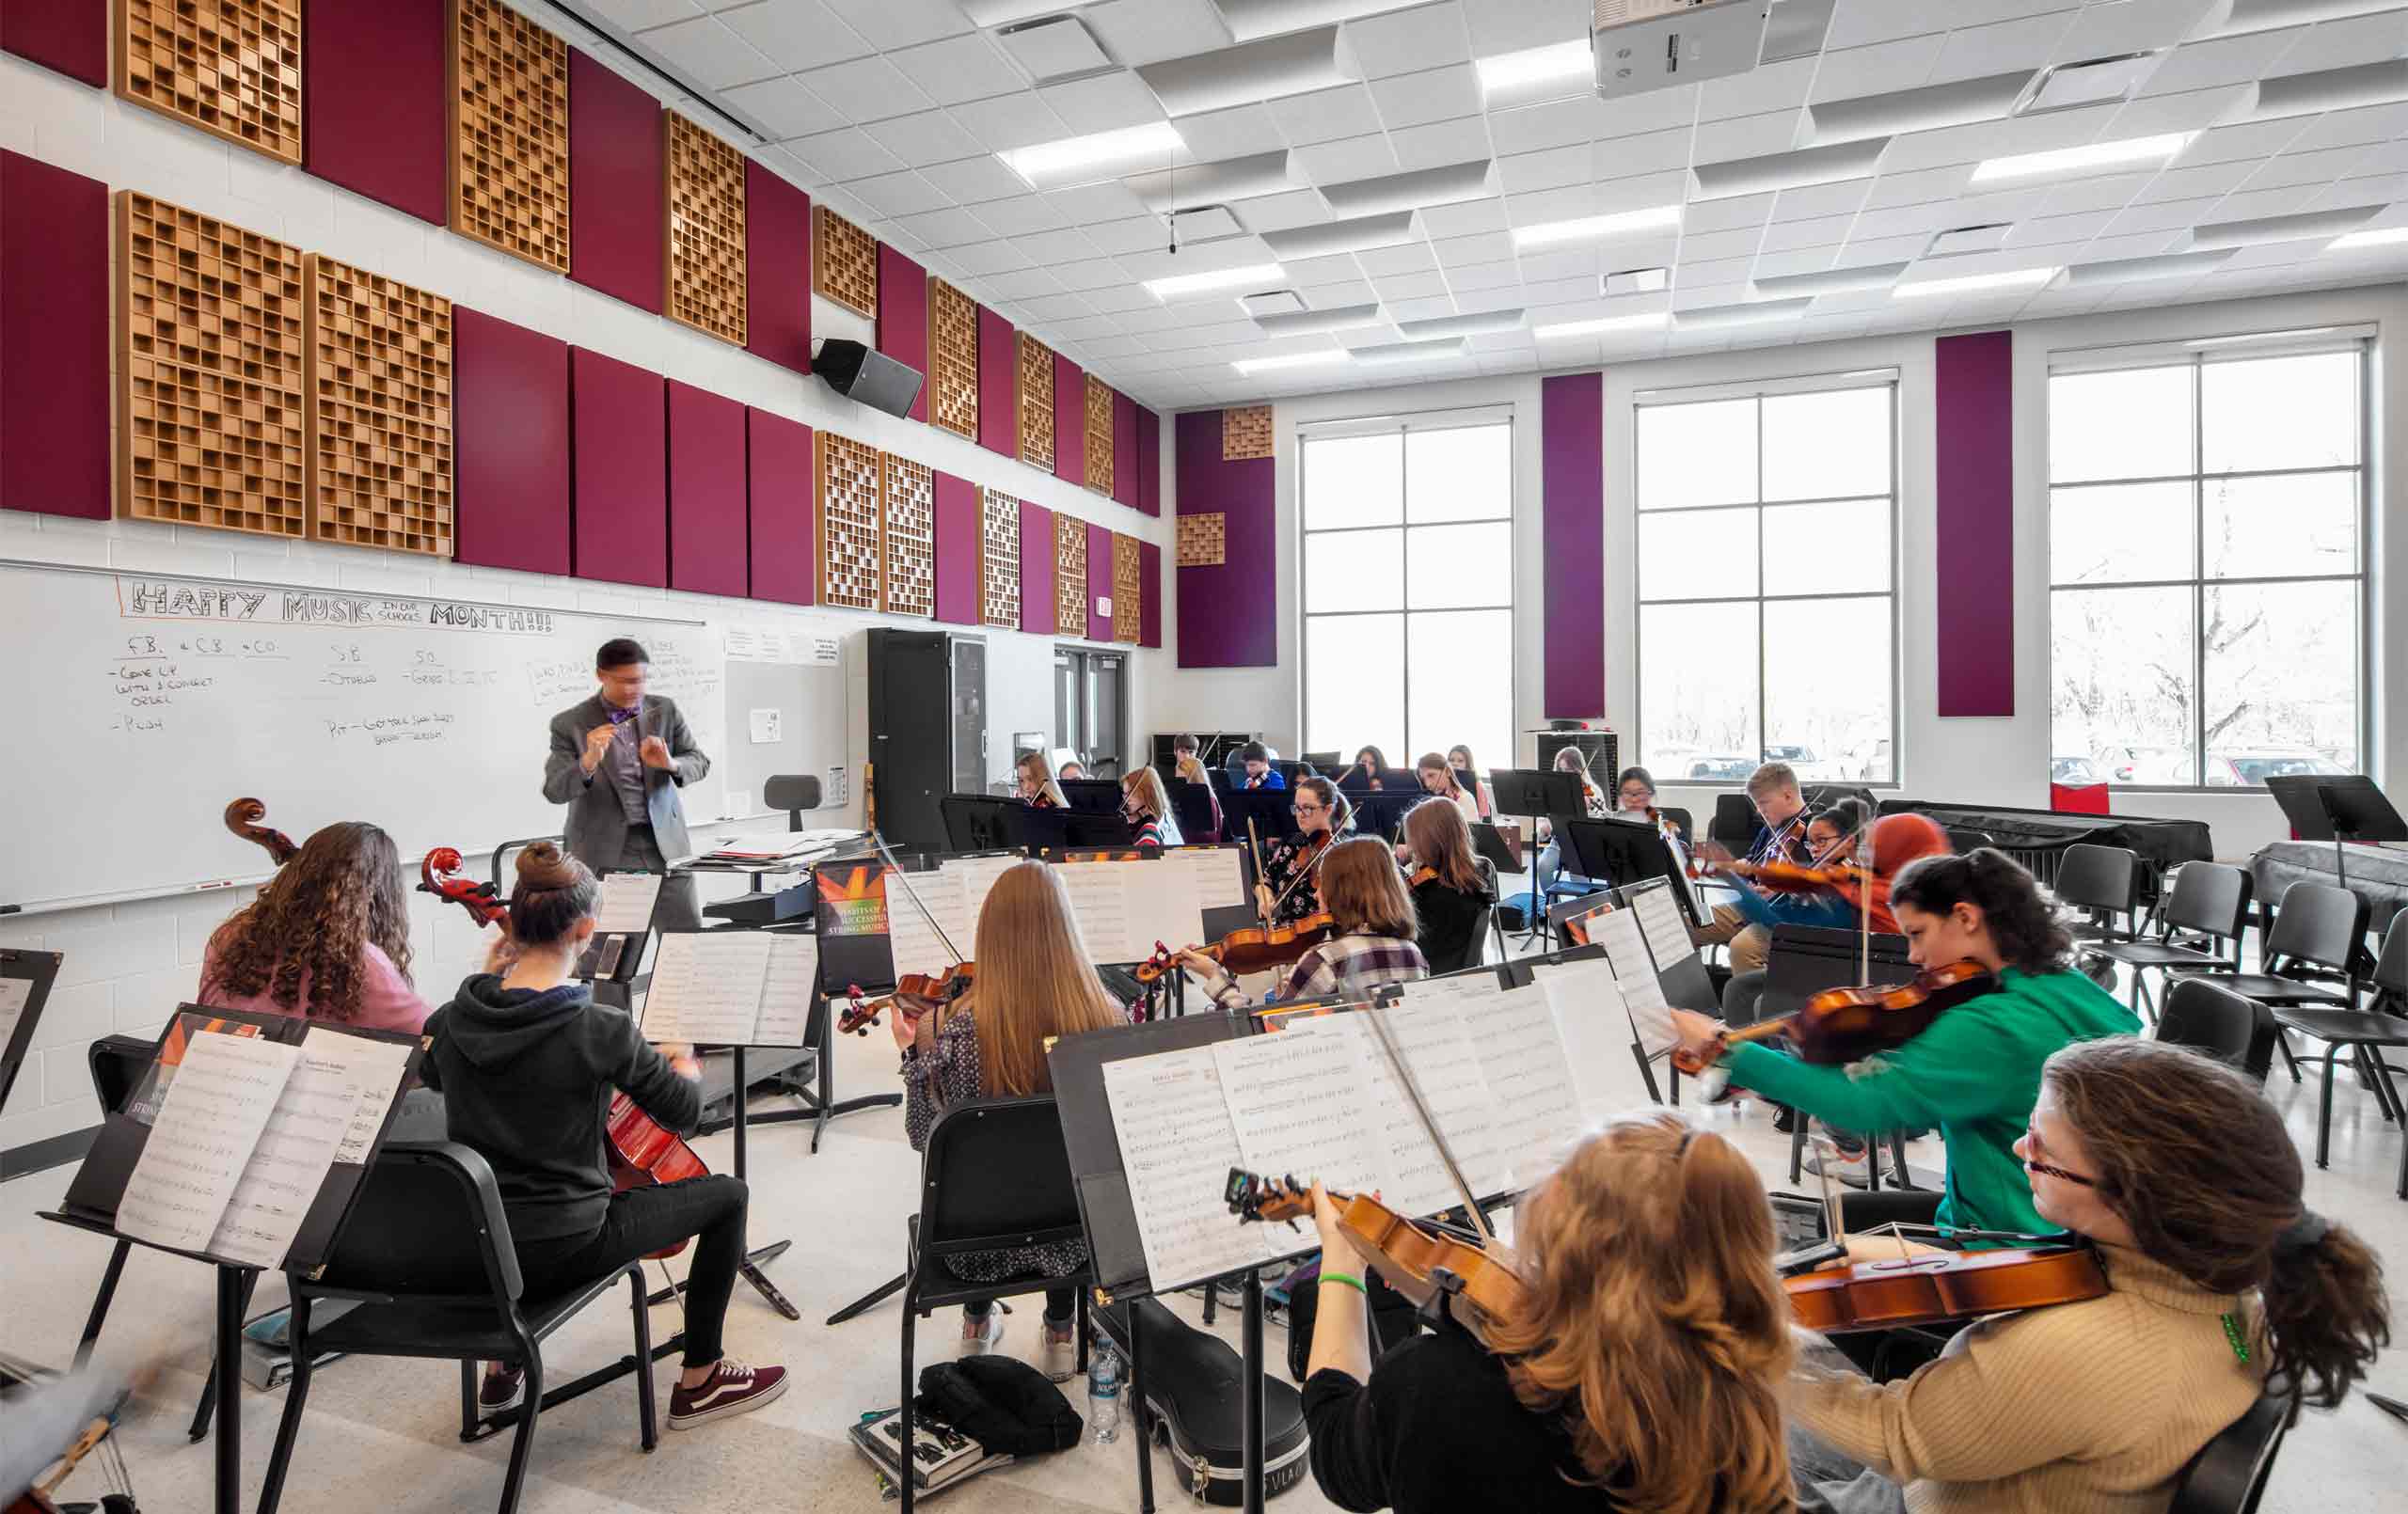 Moline High School band room with students practicing